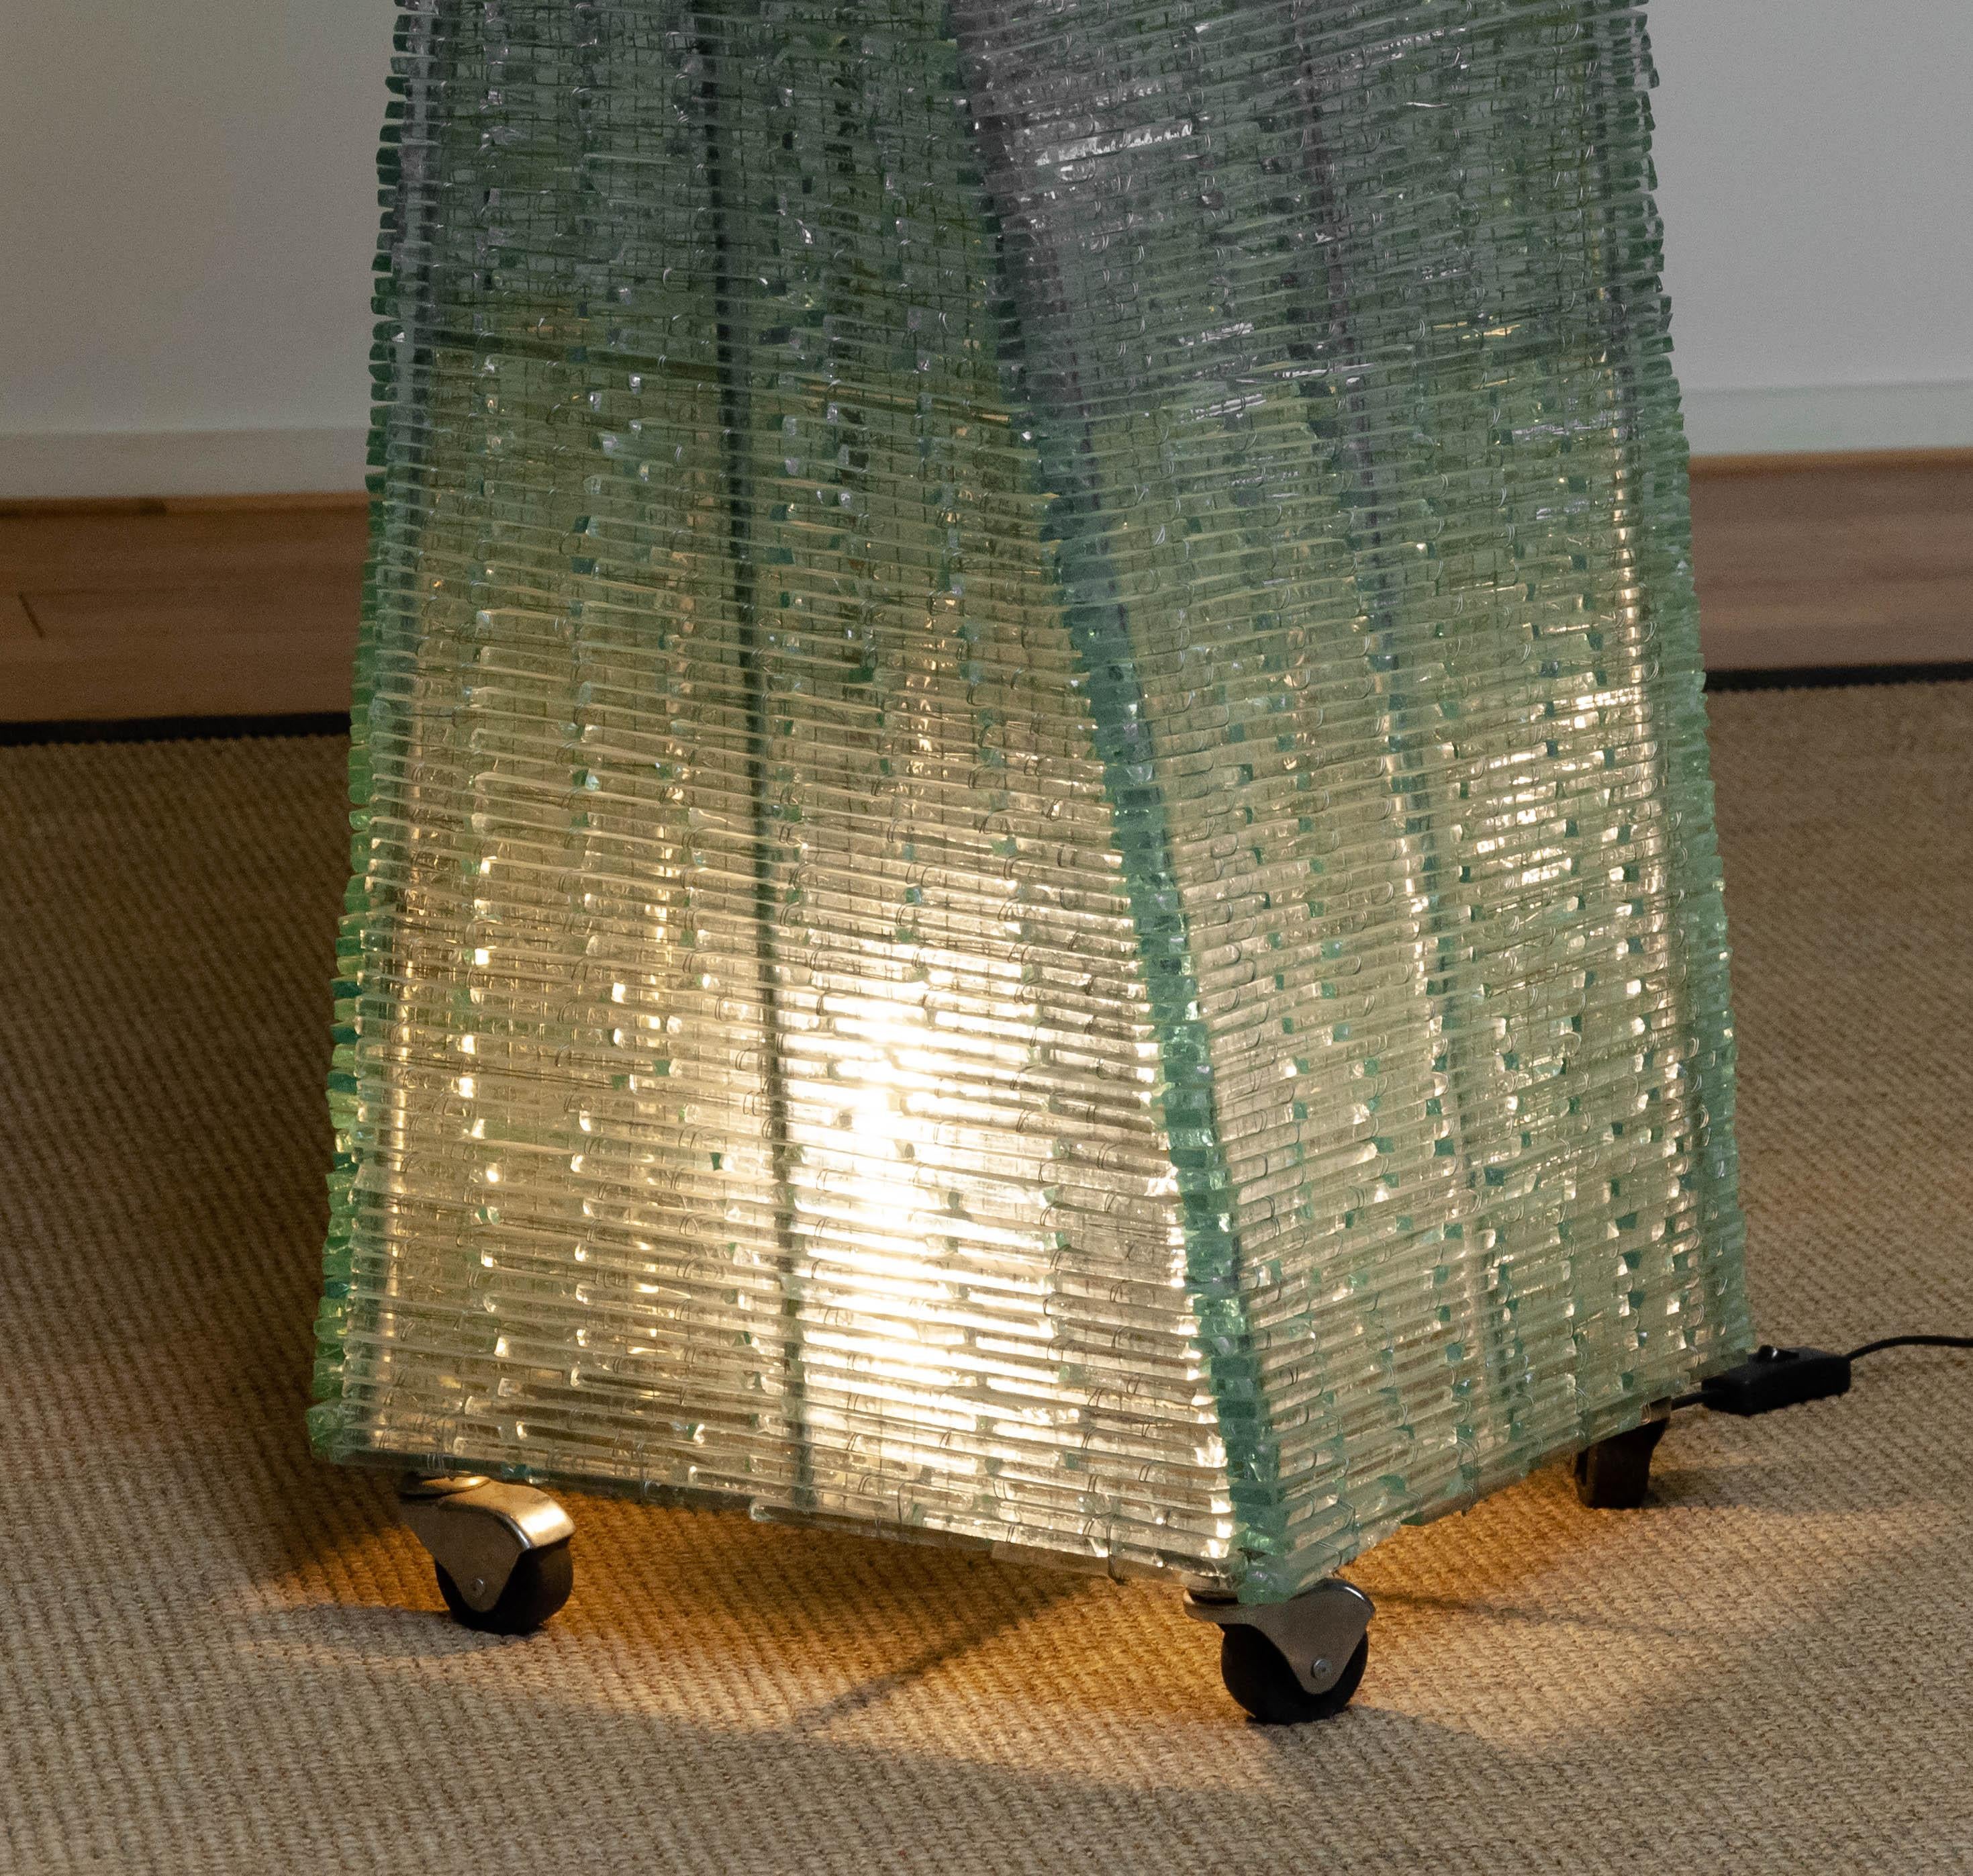 Extra large and majestic handmade ( 200cm / 79 Inches large ) Brutalist floor lamp made of thousands individual strips of glass who are hand-tied with metal wire to a metal frame similar to Pia Manu.
The foot-base is 39cm / 15,4 Inches square. The